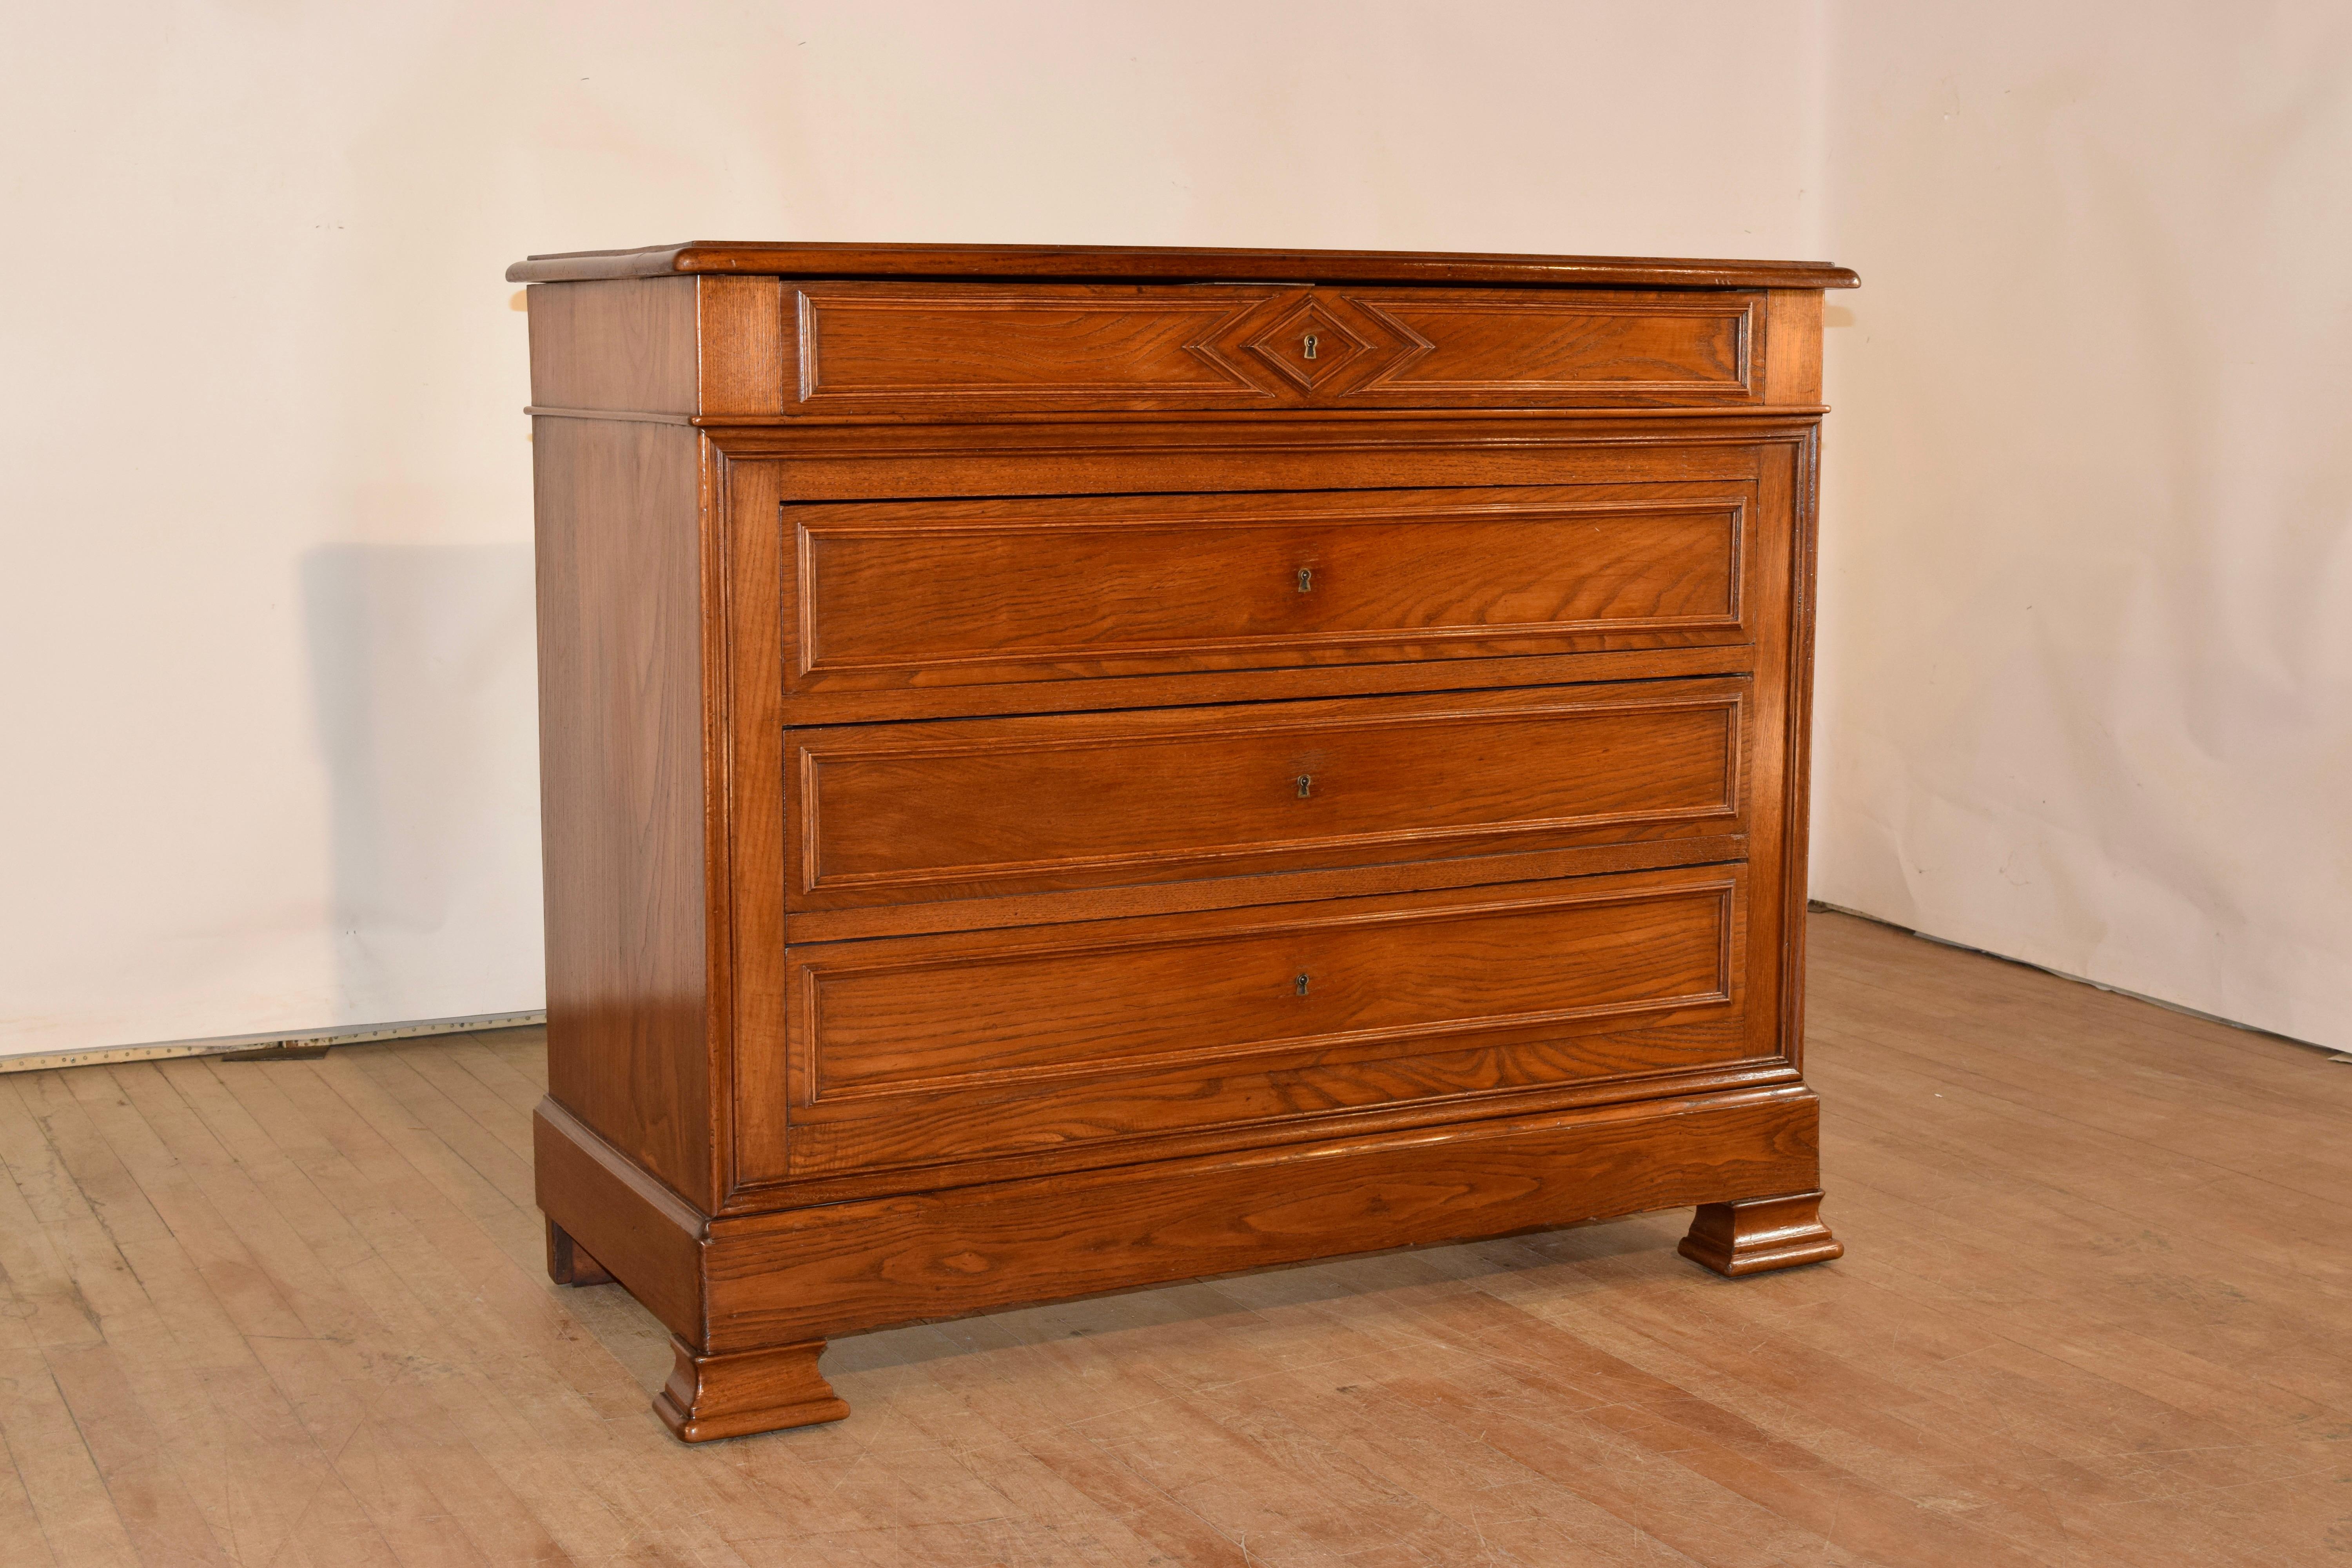 19th century Louis Philippe French commode made from Chestnut. The top is wonderfully grained and banded and has a beveled edge. The case has simple and elegant sides and for drawers in the front, all with molded decoration and a lovely banded base,